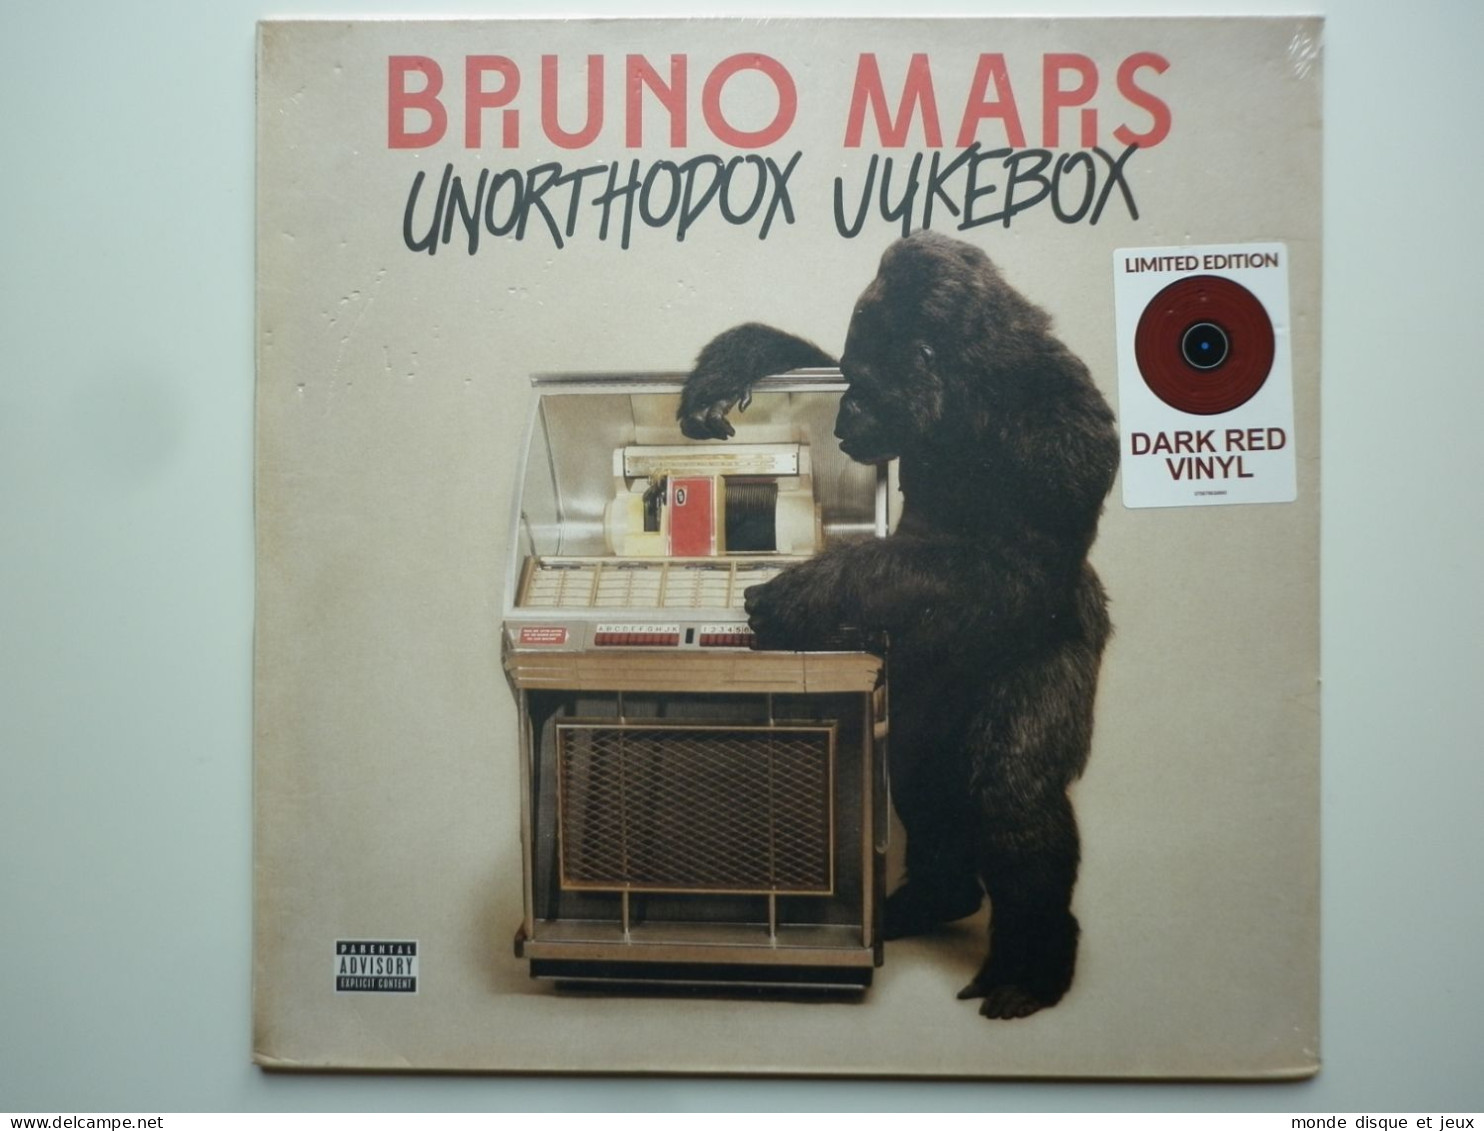 Bruno Mars Album 33Tours Vinyle Unorthodox Jukebox Couleur Rouge / Red - Other - French Music